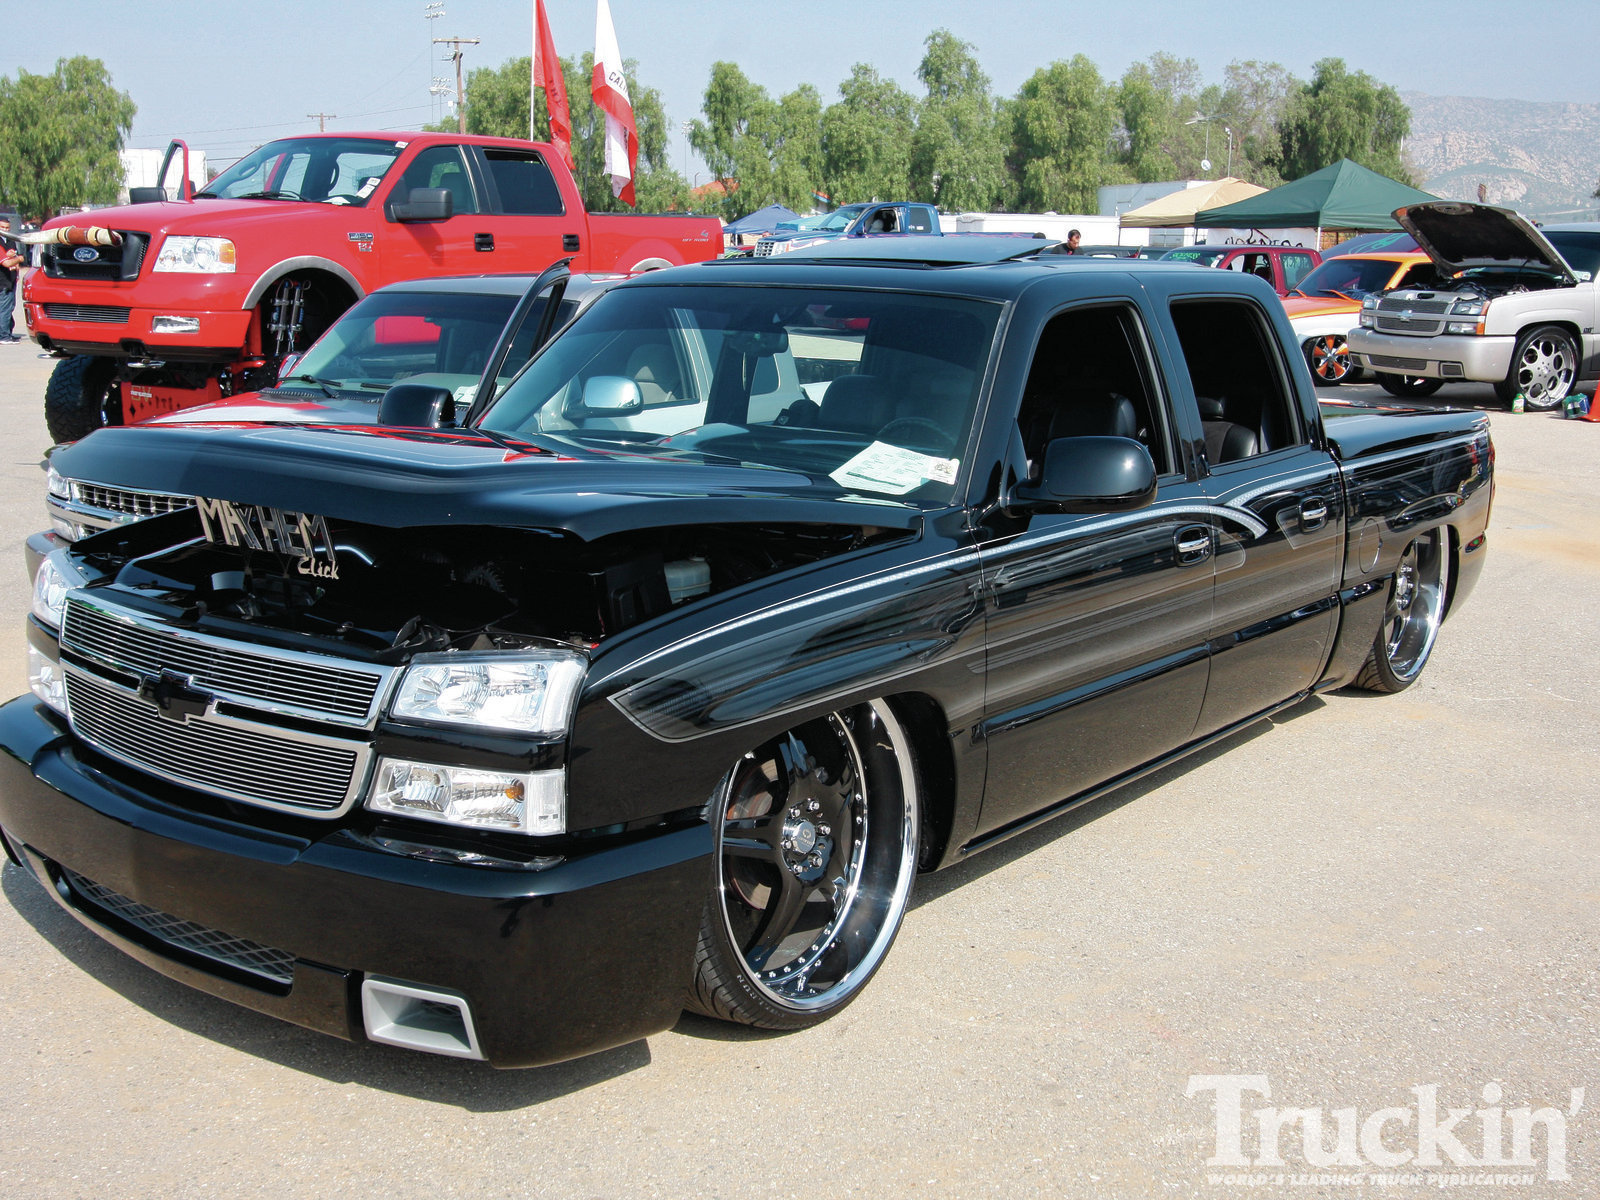 Forbidden Fantasy Socal Truck Show Chevy Lowered Photo